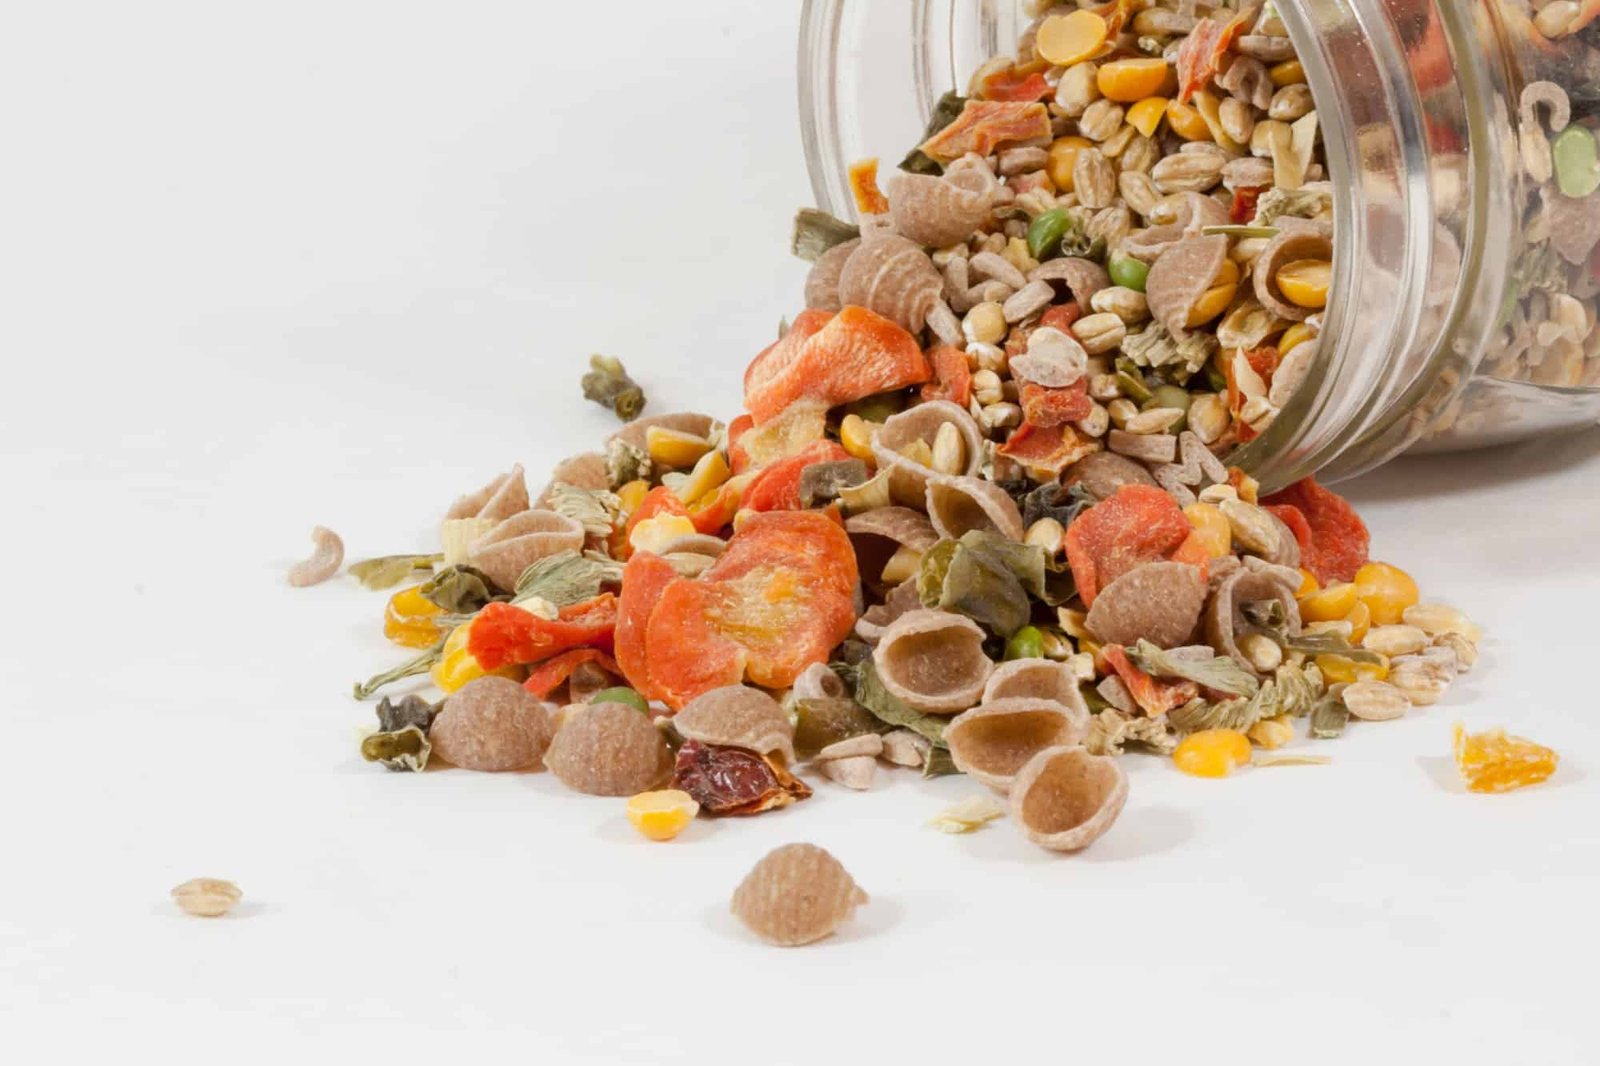 assortment of dried food in a jar tipped over on a white background